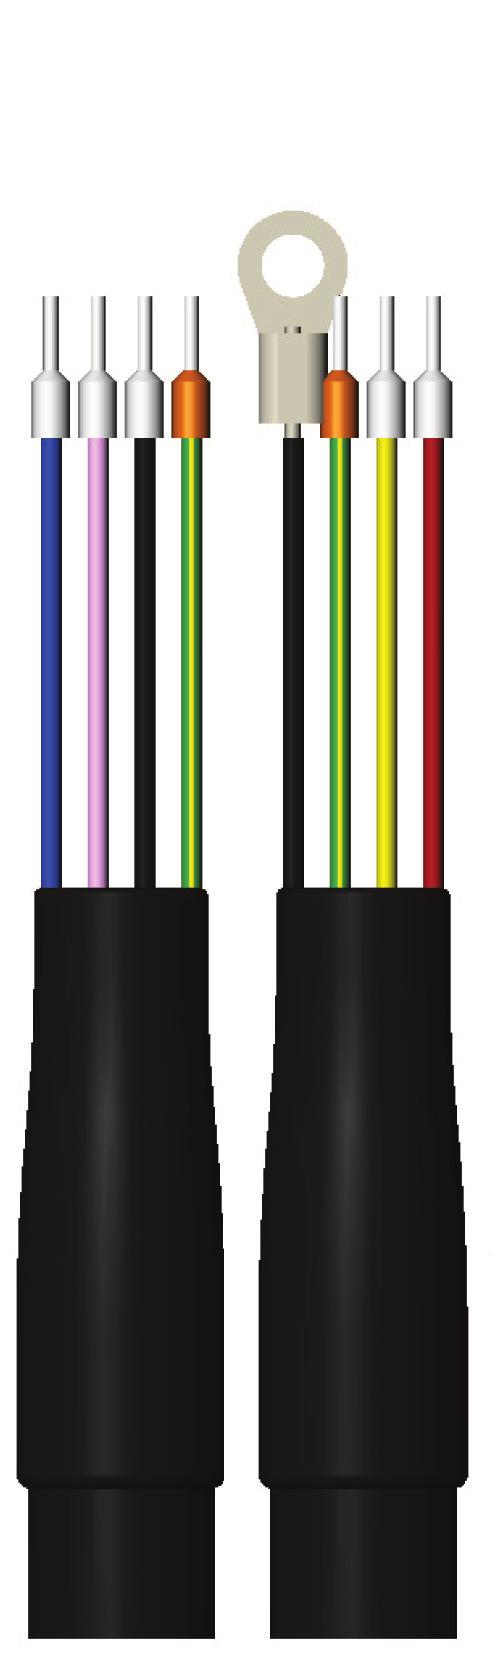 4.6.2 and Mx Body Style 2-4" through 12" Blue Right Sensing Electrode- 1 (E1F) Pink Left Sensing Electrode- 2 (E2F) Black Reference Ground - 3 (C) Green/Yellow Cable Shield Ground - 4 (SH) Black